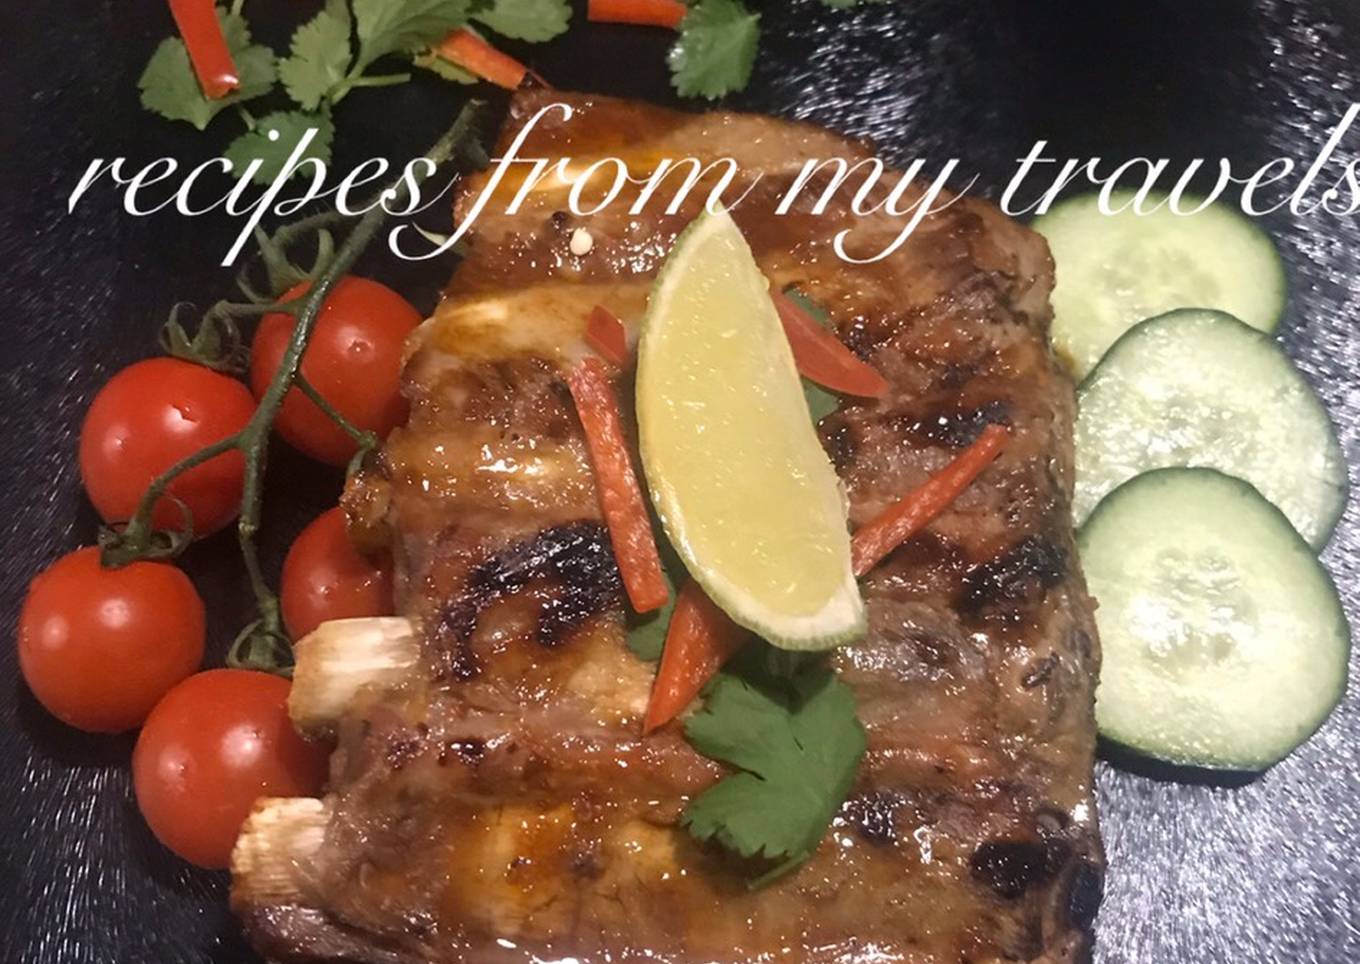 Whisky (non-alcoholic) infused pork ribs with chilli & lime glaze